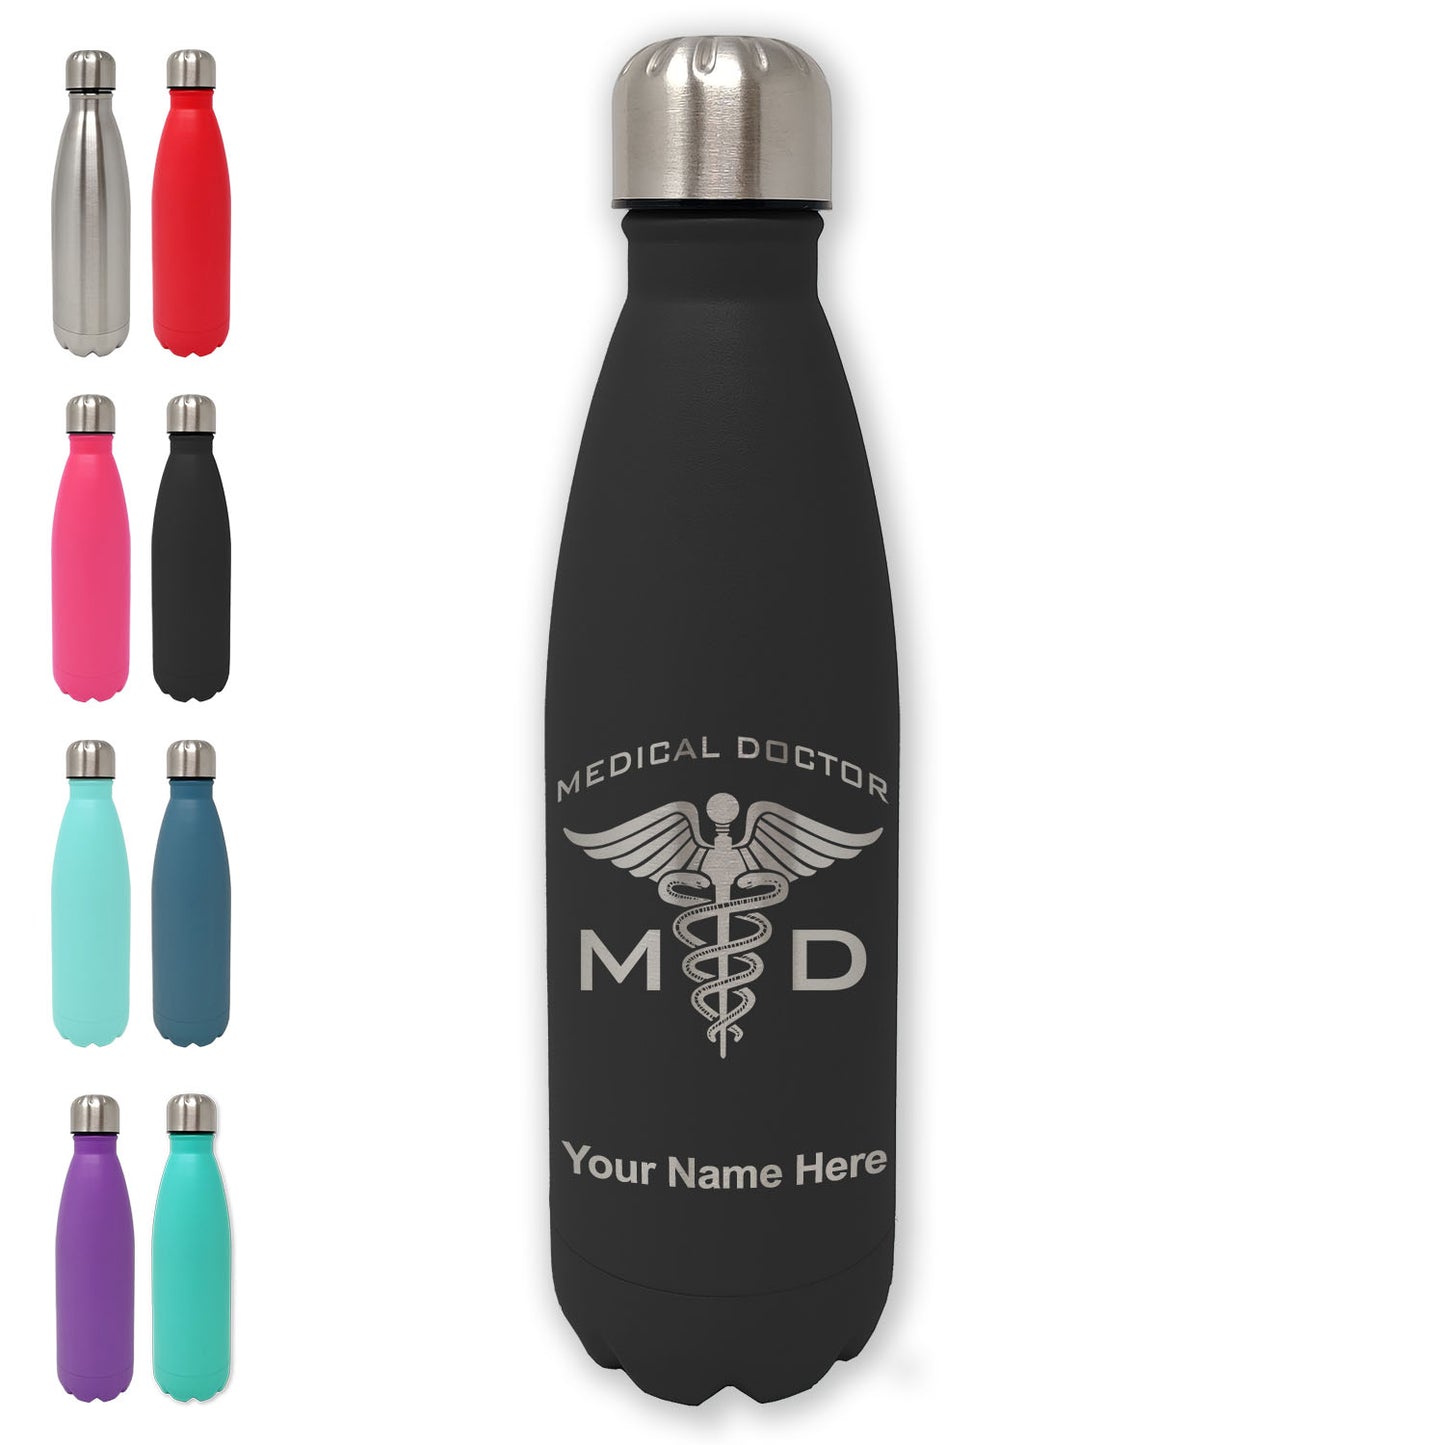 LaserGram Double Wall Water Bottle, MD Medical Doctor, Personalized Engraving Included